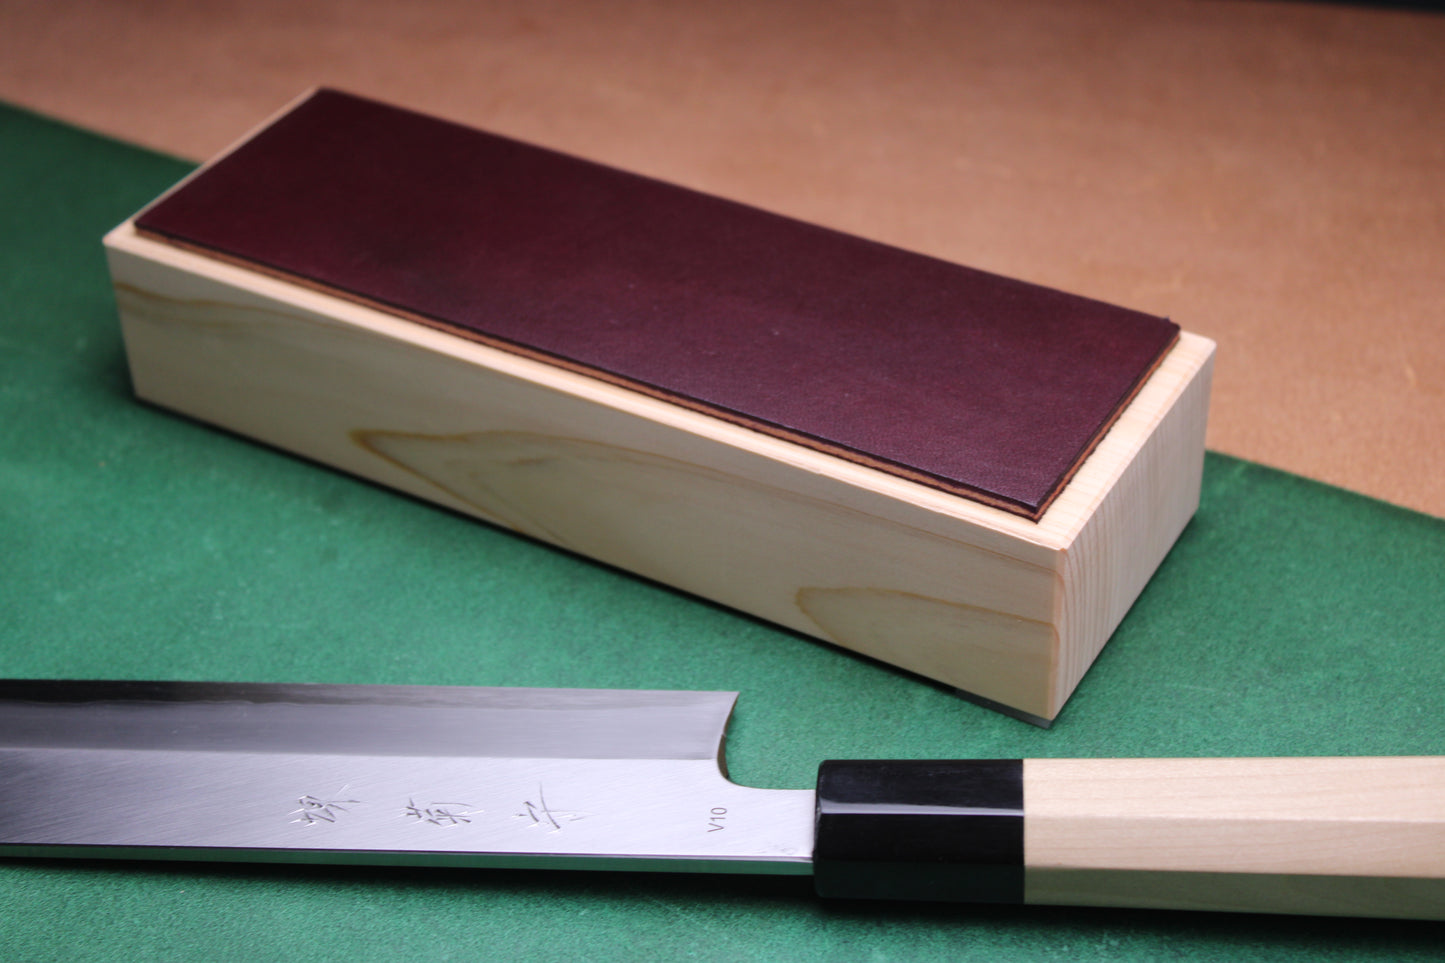 knife strop made of English bridle leather colored plum purple attached to sturdy tall smooth hinoki wood base sakai kikumori japanese usuba vegetable knife foreground with background faded green and brown